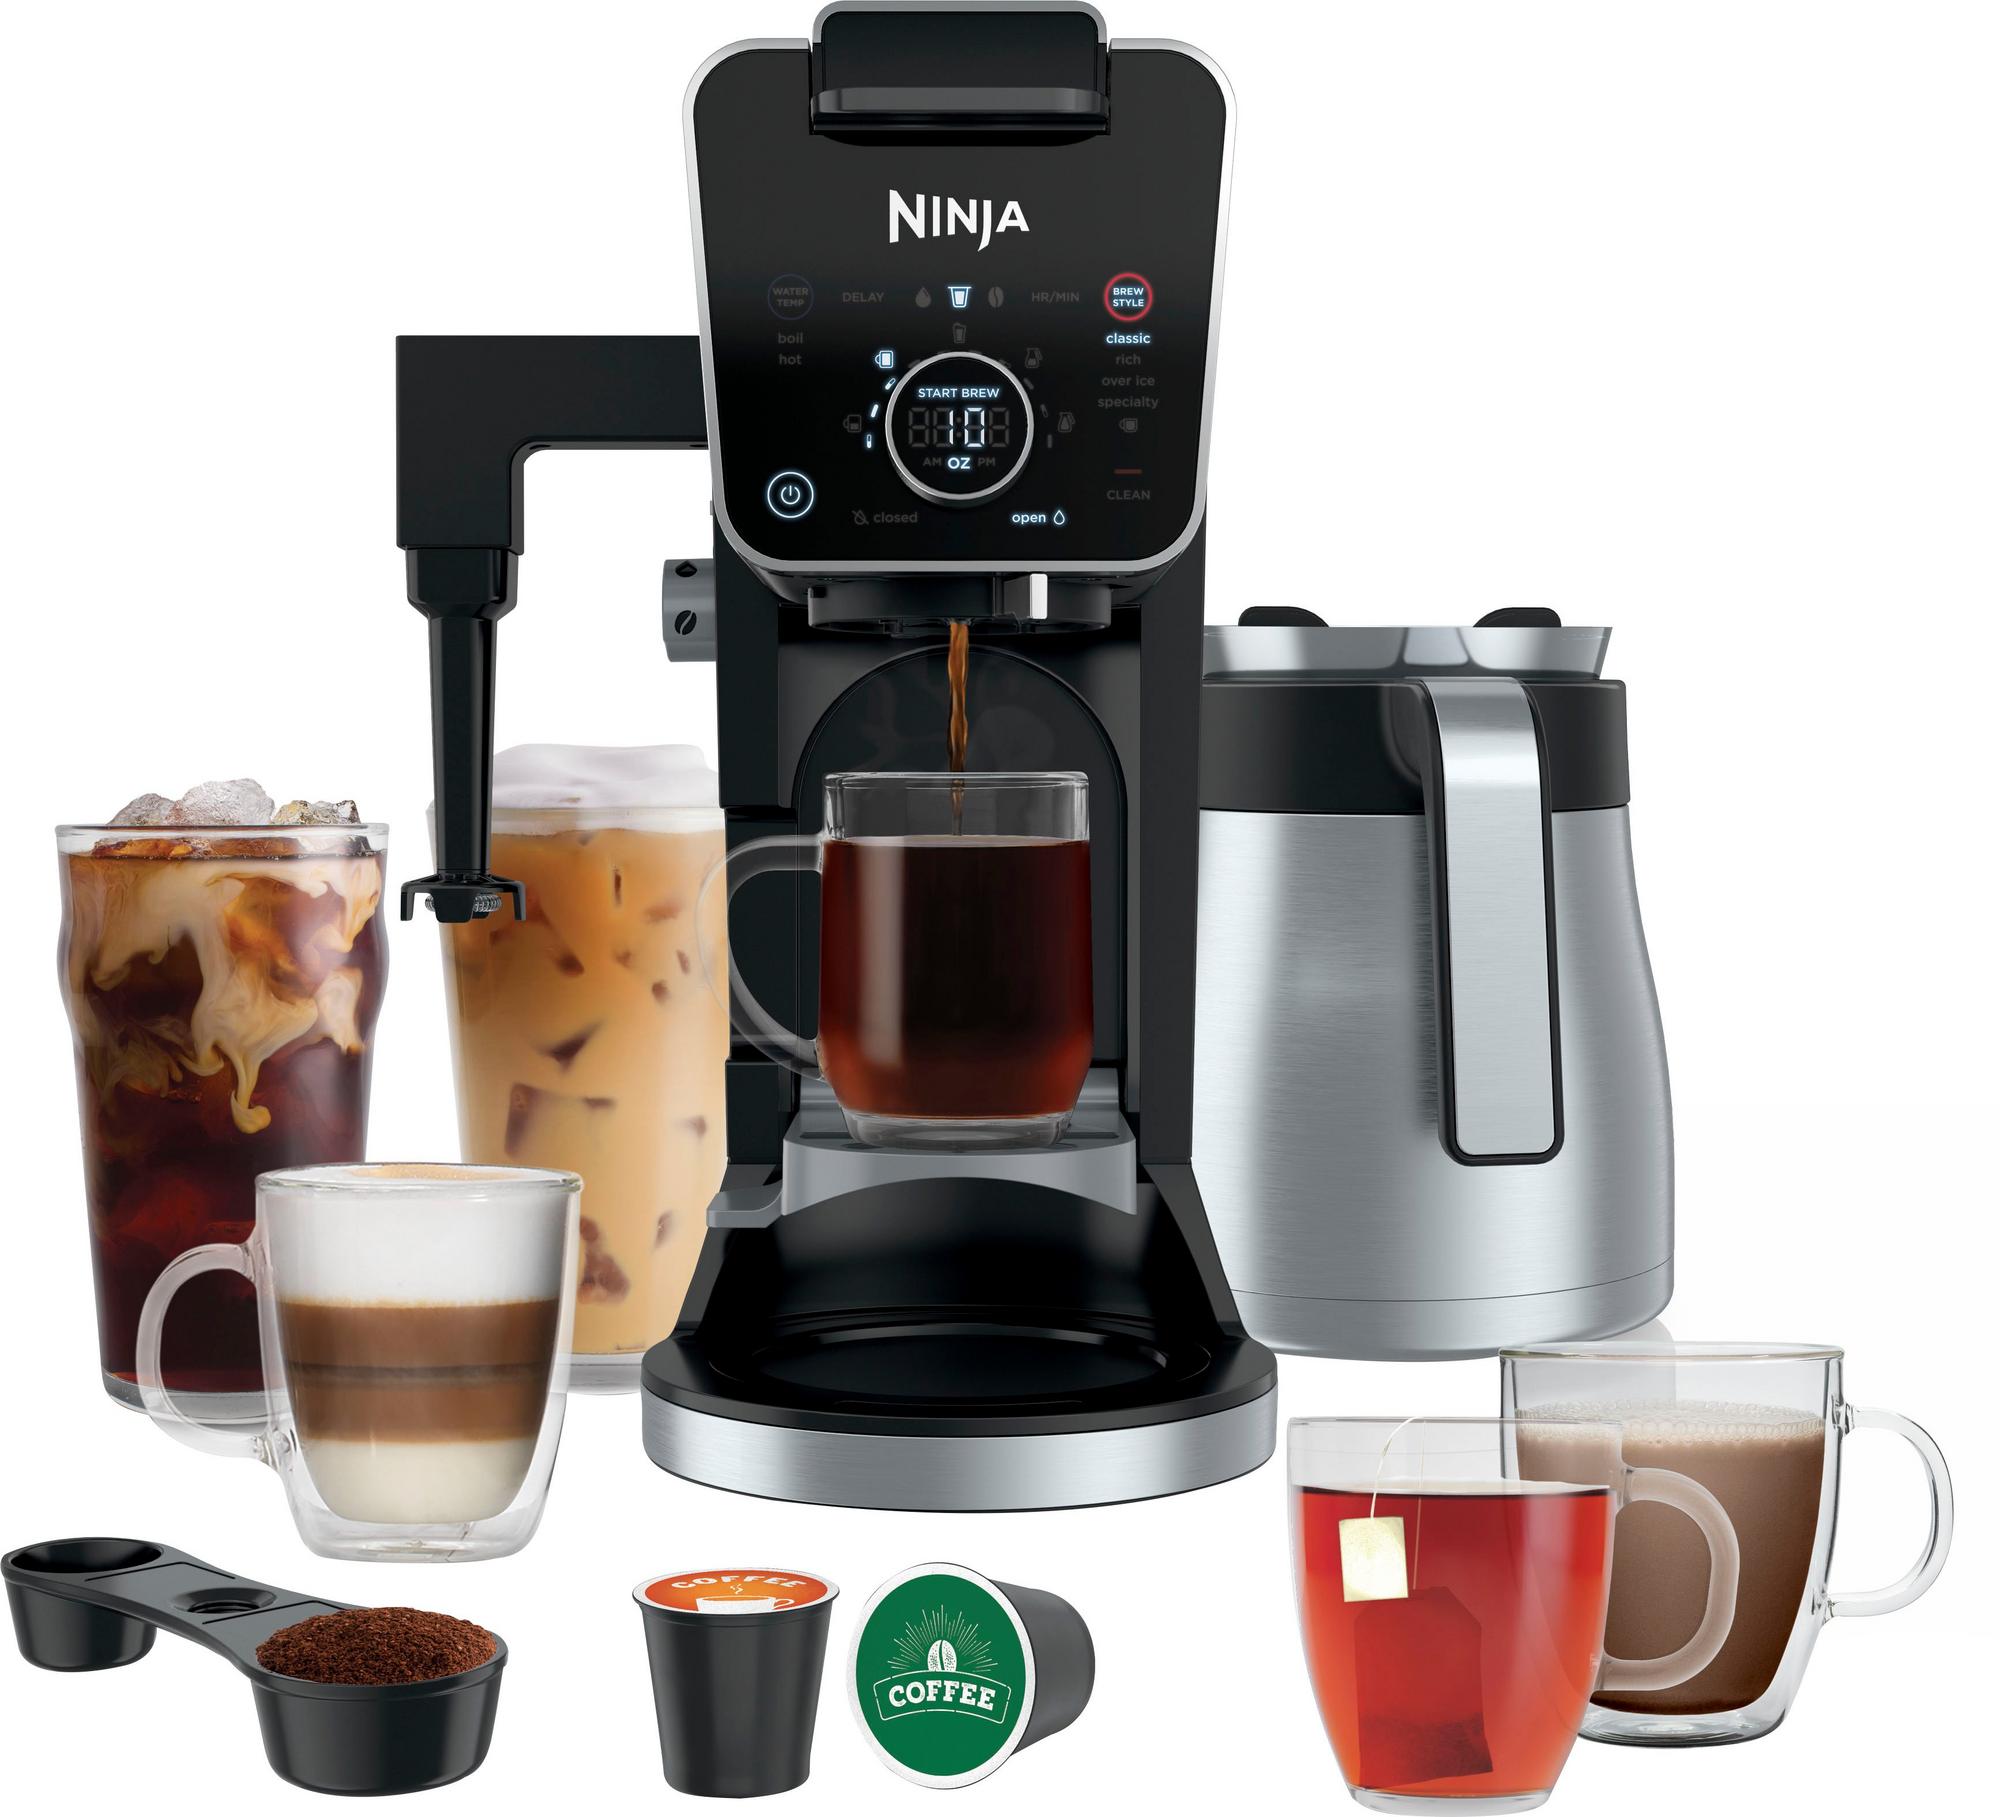 https://i8.amplience.net/i/aarons/6405356/Ninja%20-%20DualBrew%20PRO%2012-Cup%20Specialty%20Coffee%20System%20with%20K-Cup%20Compatibility,%204%20Brew%20Styles,%20Hot%20Water%20System%20&%20Frother%20-%20Black/Silver?$large$